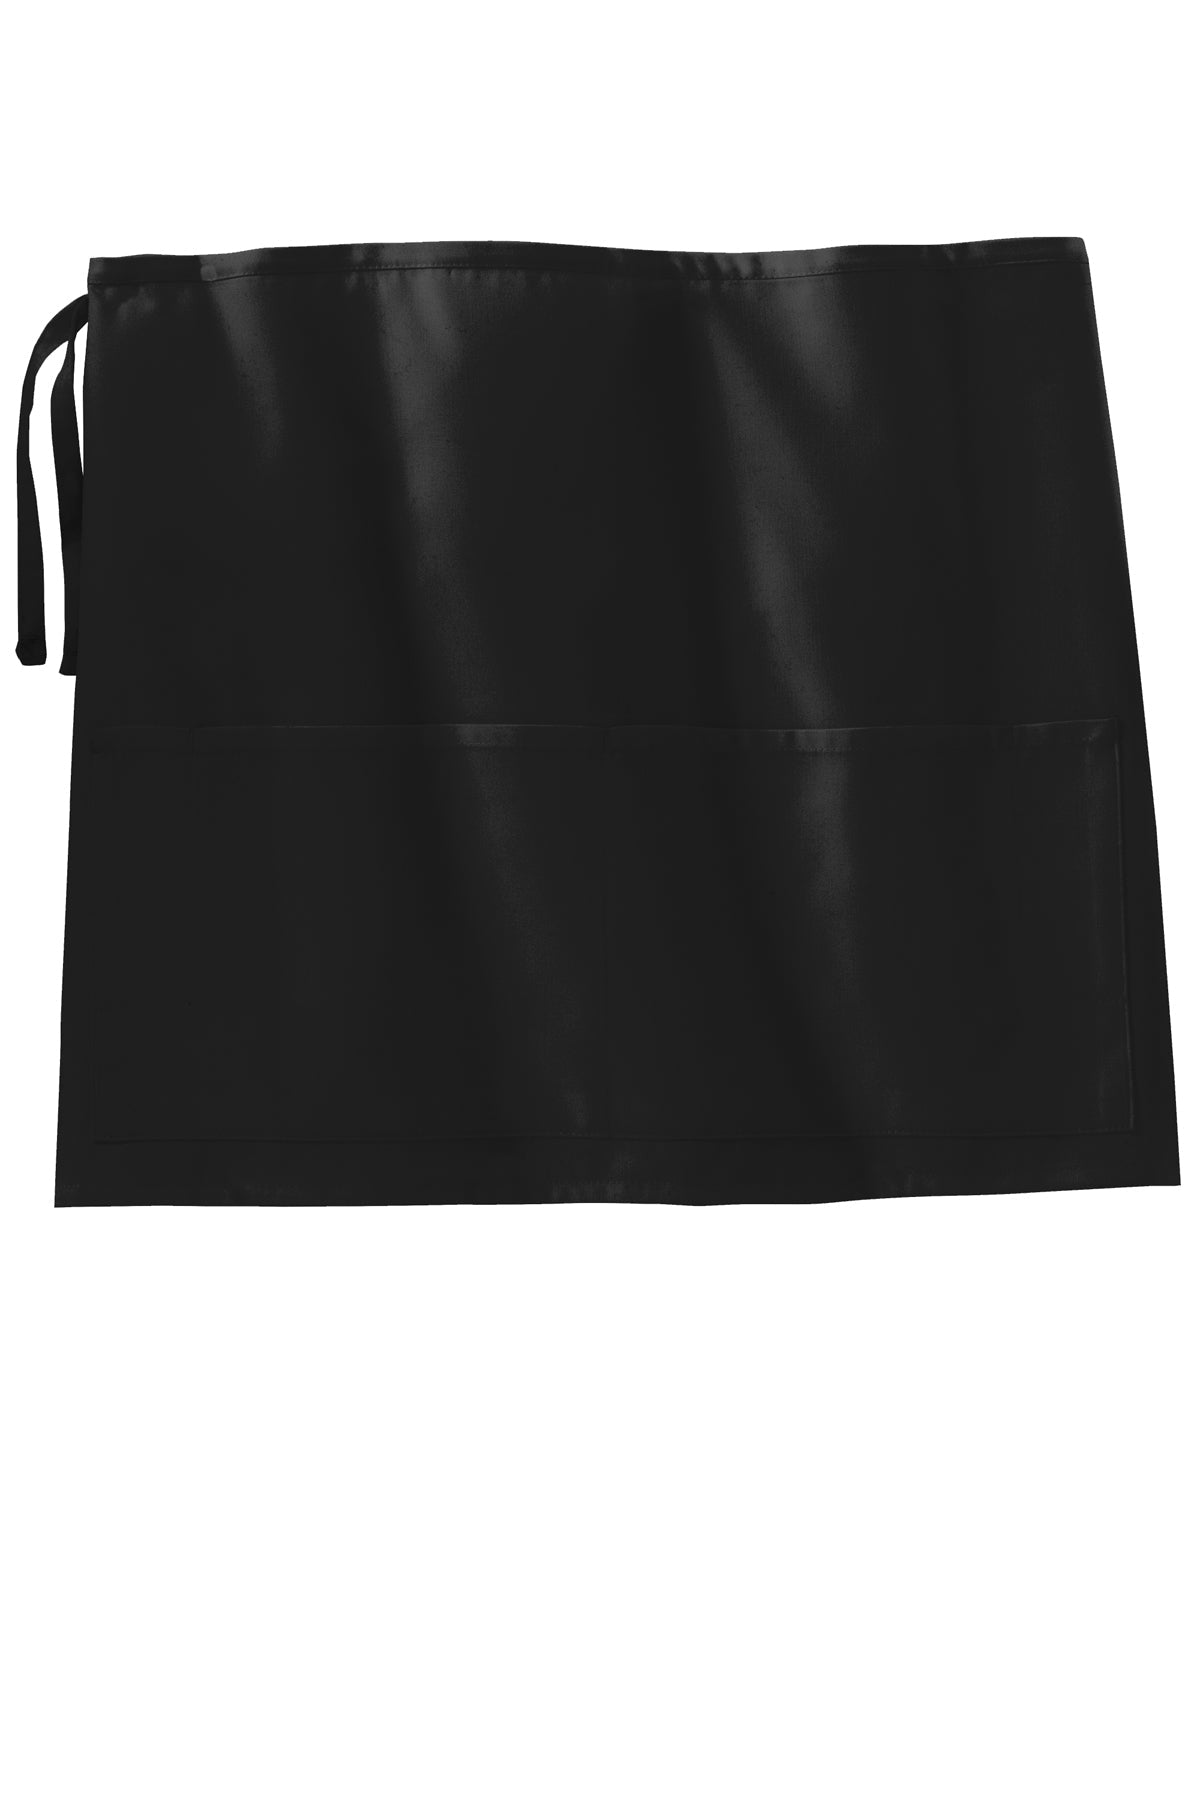 Port Authority Easy Care Half Bistro Branded Aprons with Stain Release, Black